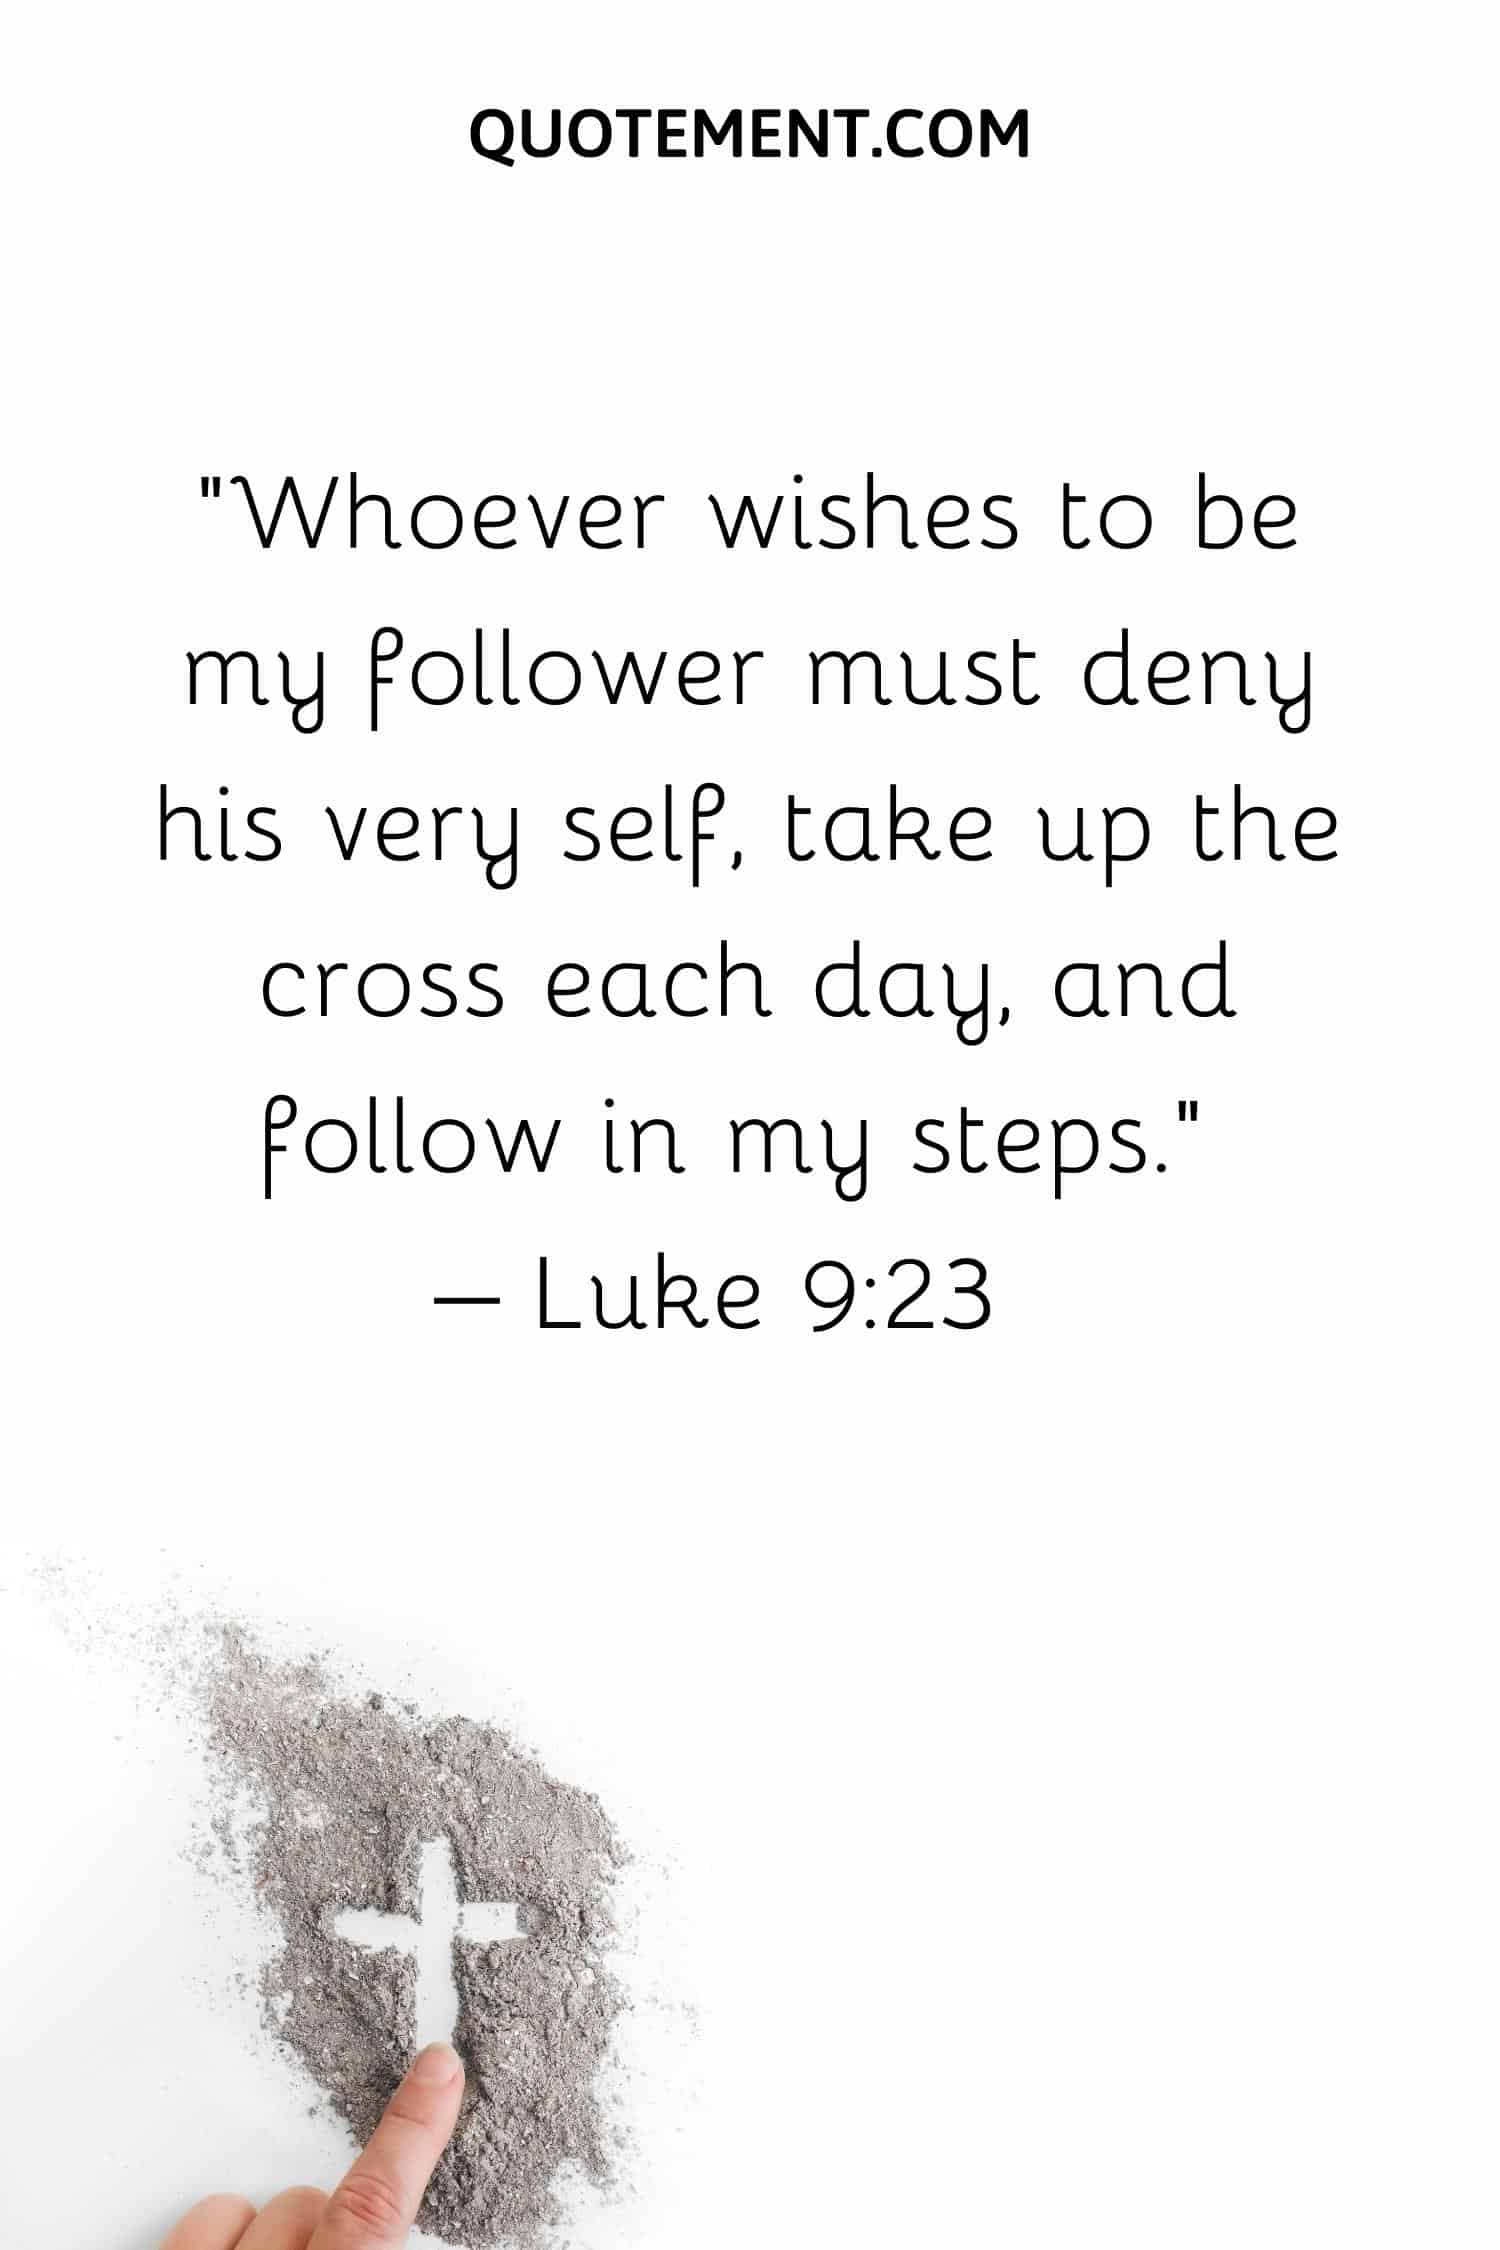 Whoever wishes to be my follower must deny his very self, take up the cross each day, and follow in my steps